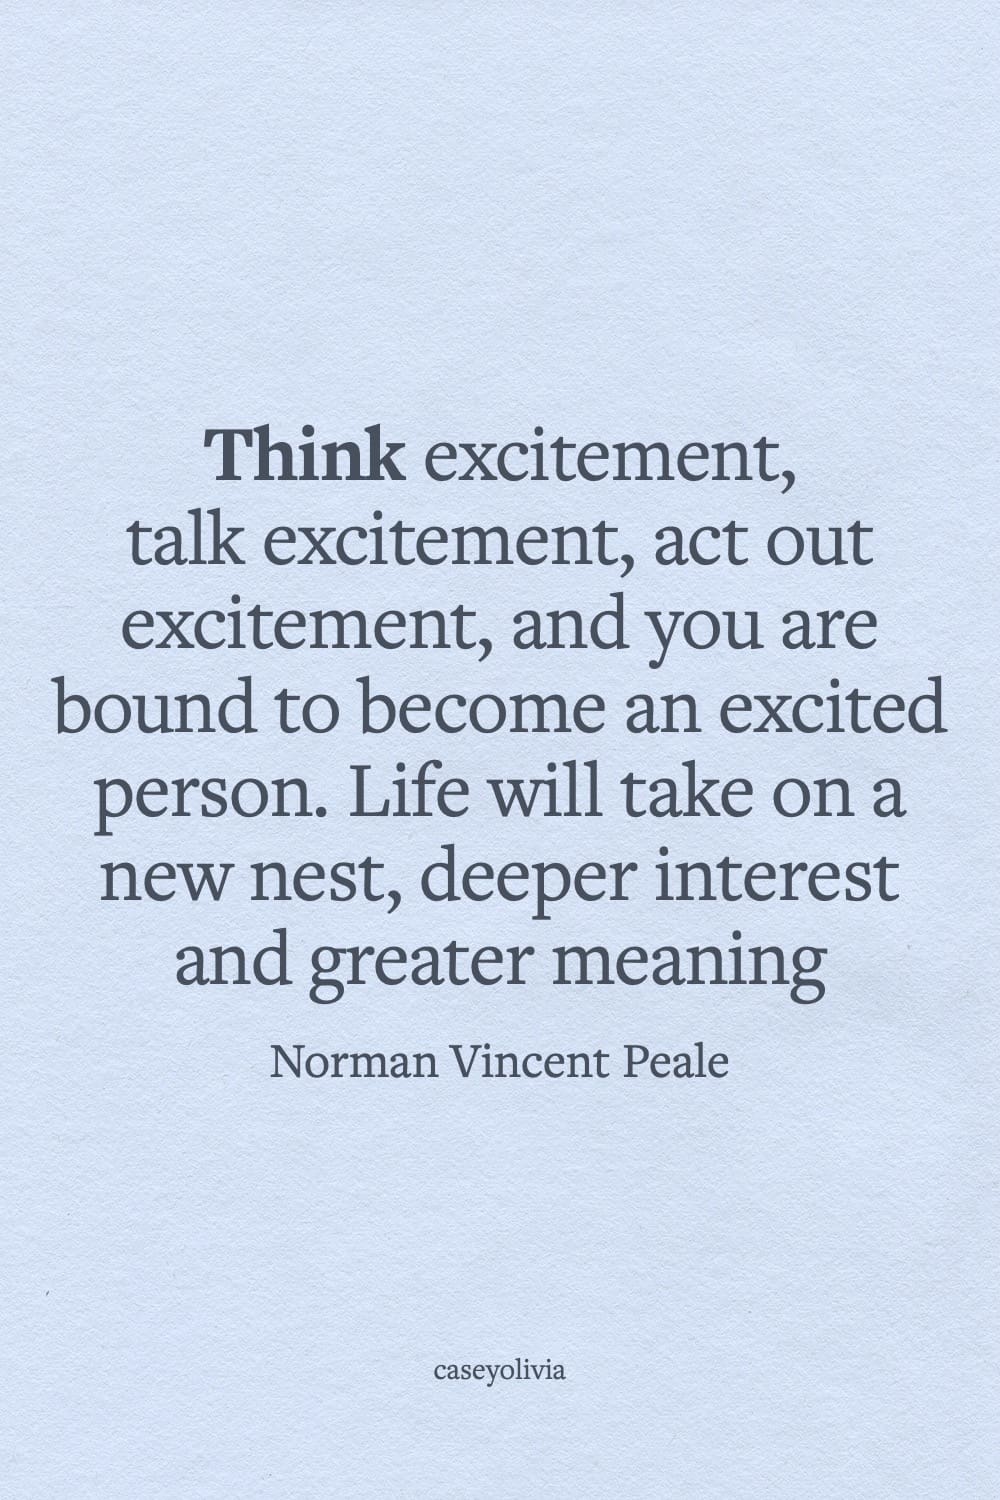 think excitement talk excitement act out excitement quote